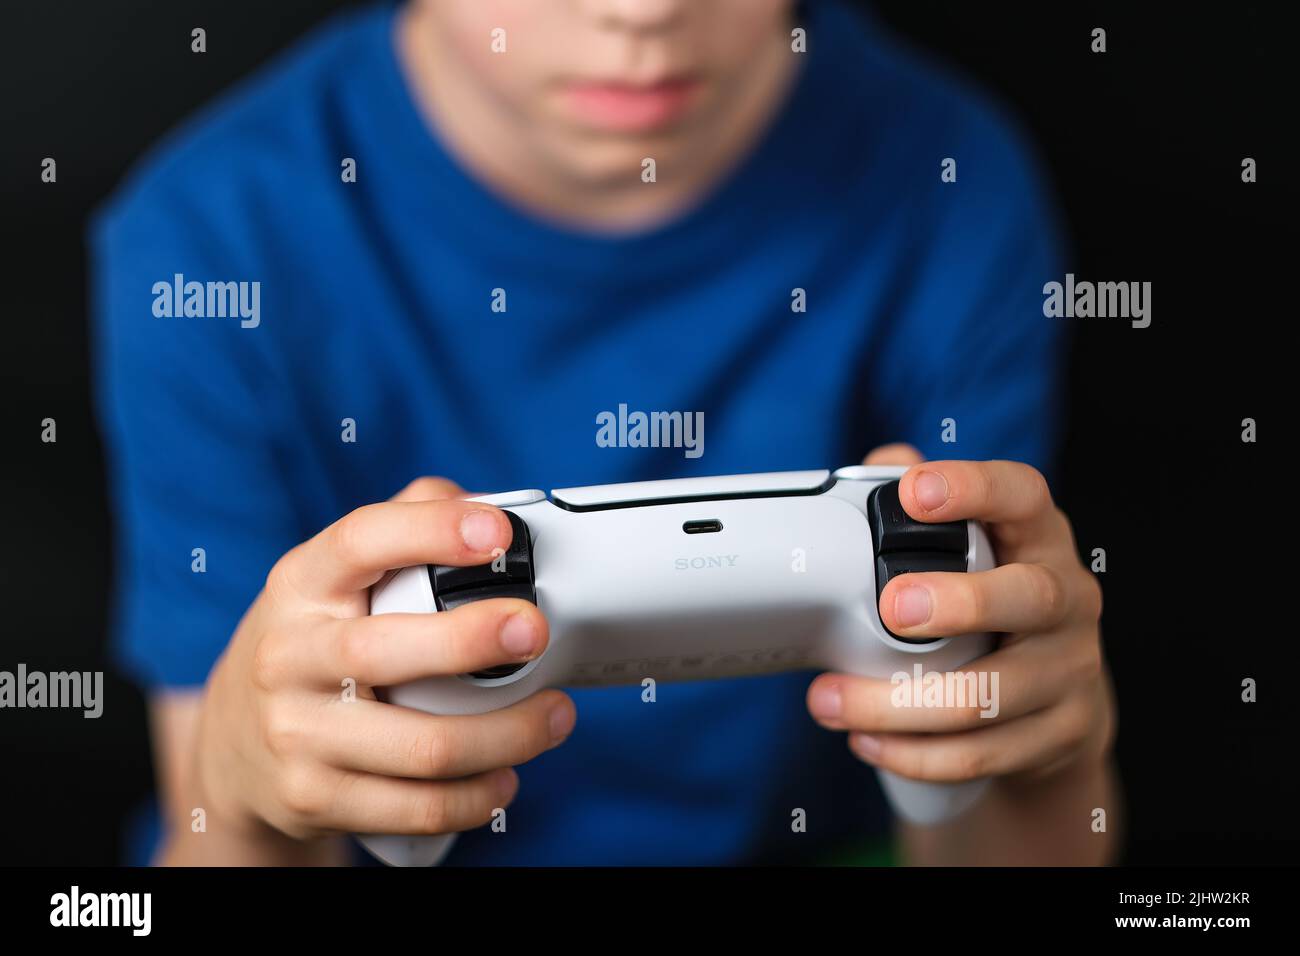 SONY logotype seen on PS5 DualSense controller which is seen in hands of a child. Concept for gaming. Stafford, United Kingdom, July 19, 2022 Stock Photo